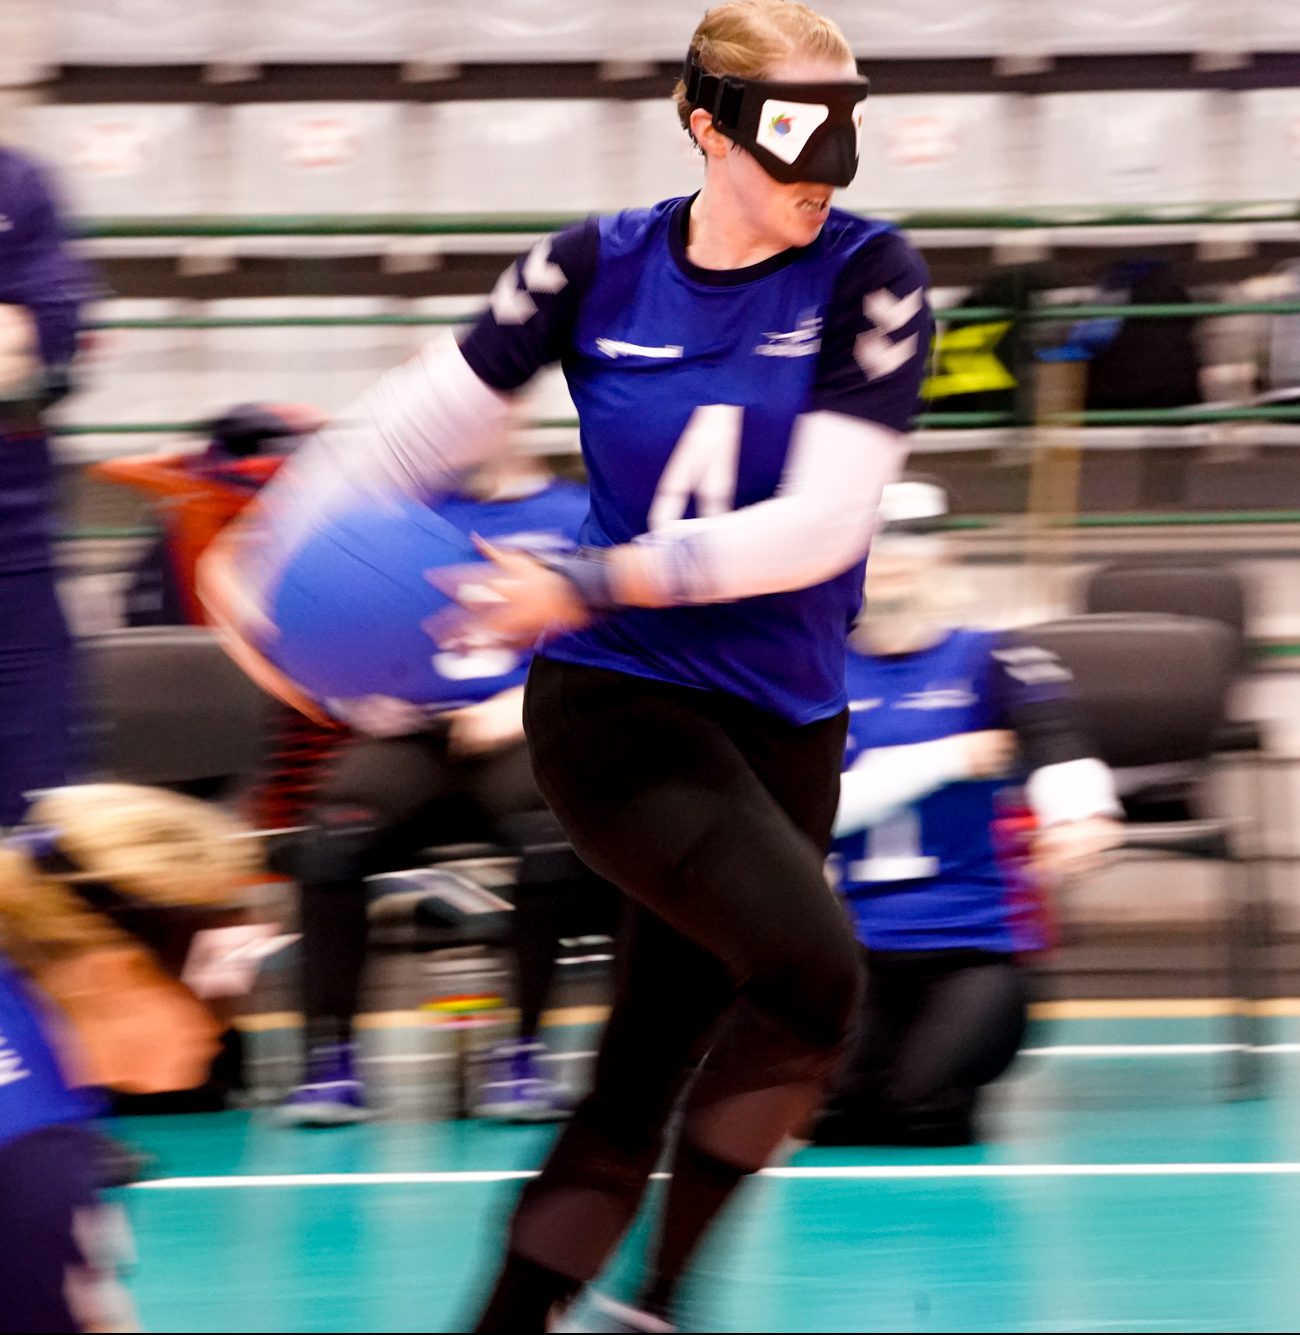 Georgie Bullen playing for GB Women at the 2022 World Championships. She is wearing blue GB kit and about to throw the ball to the opposing team.